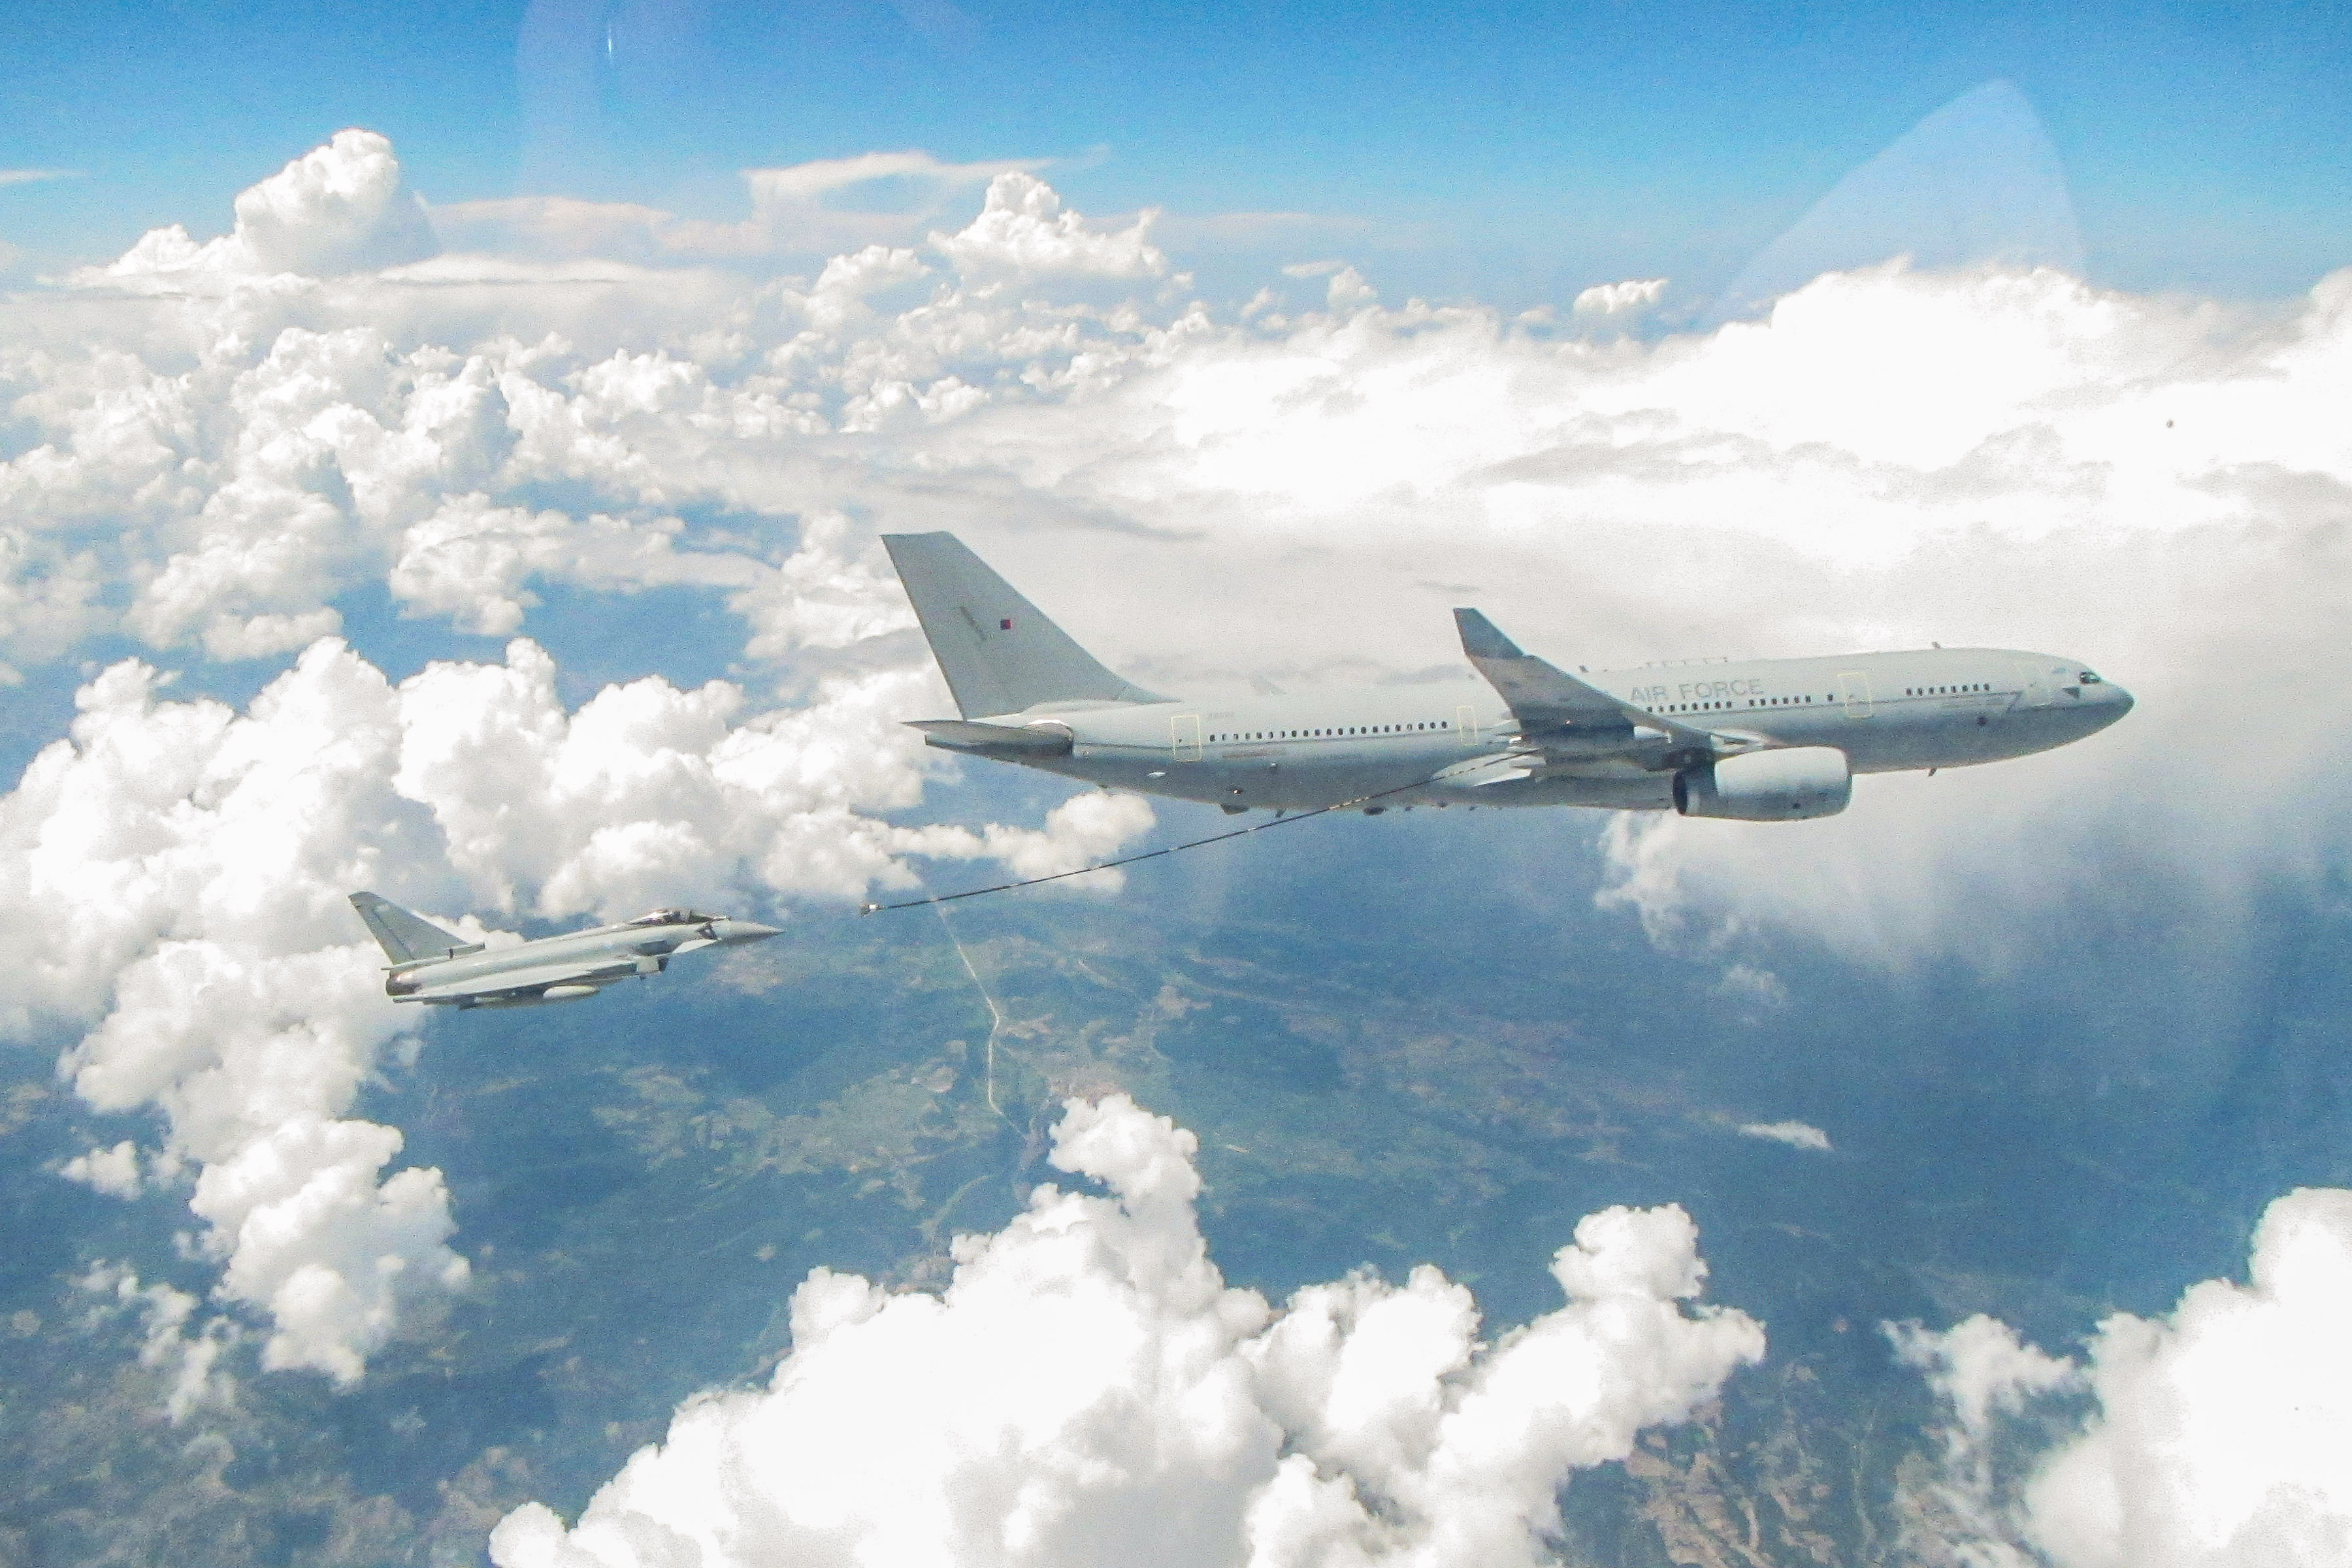 Image shows Typhoon in air to air refuelling of Voyager aircraft.